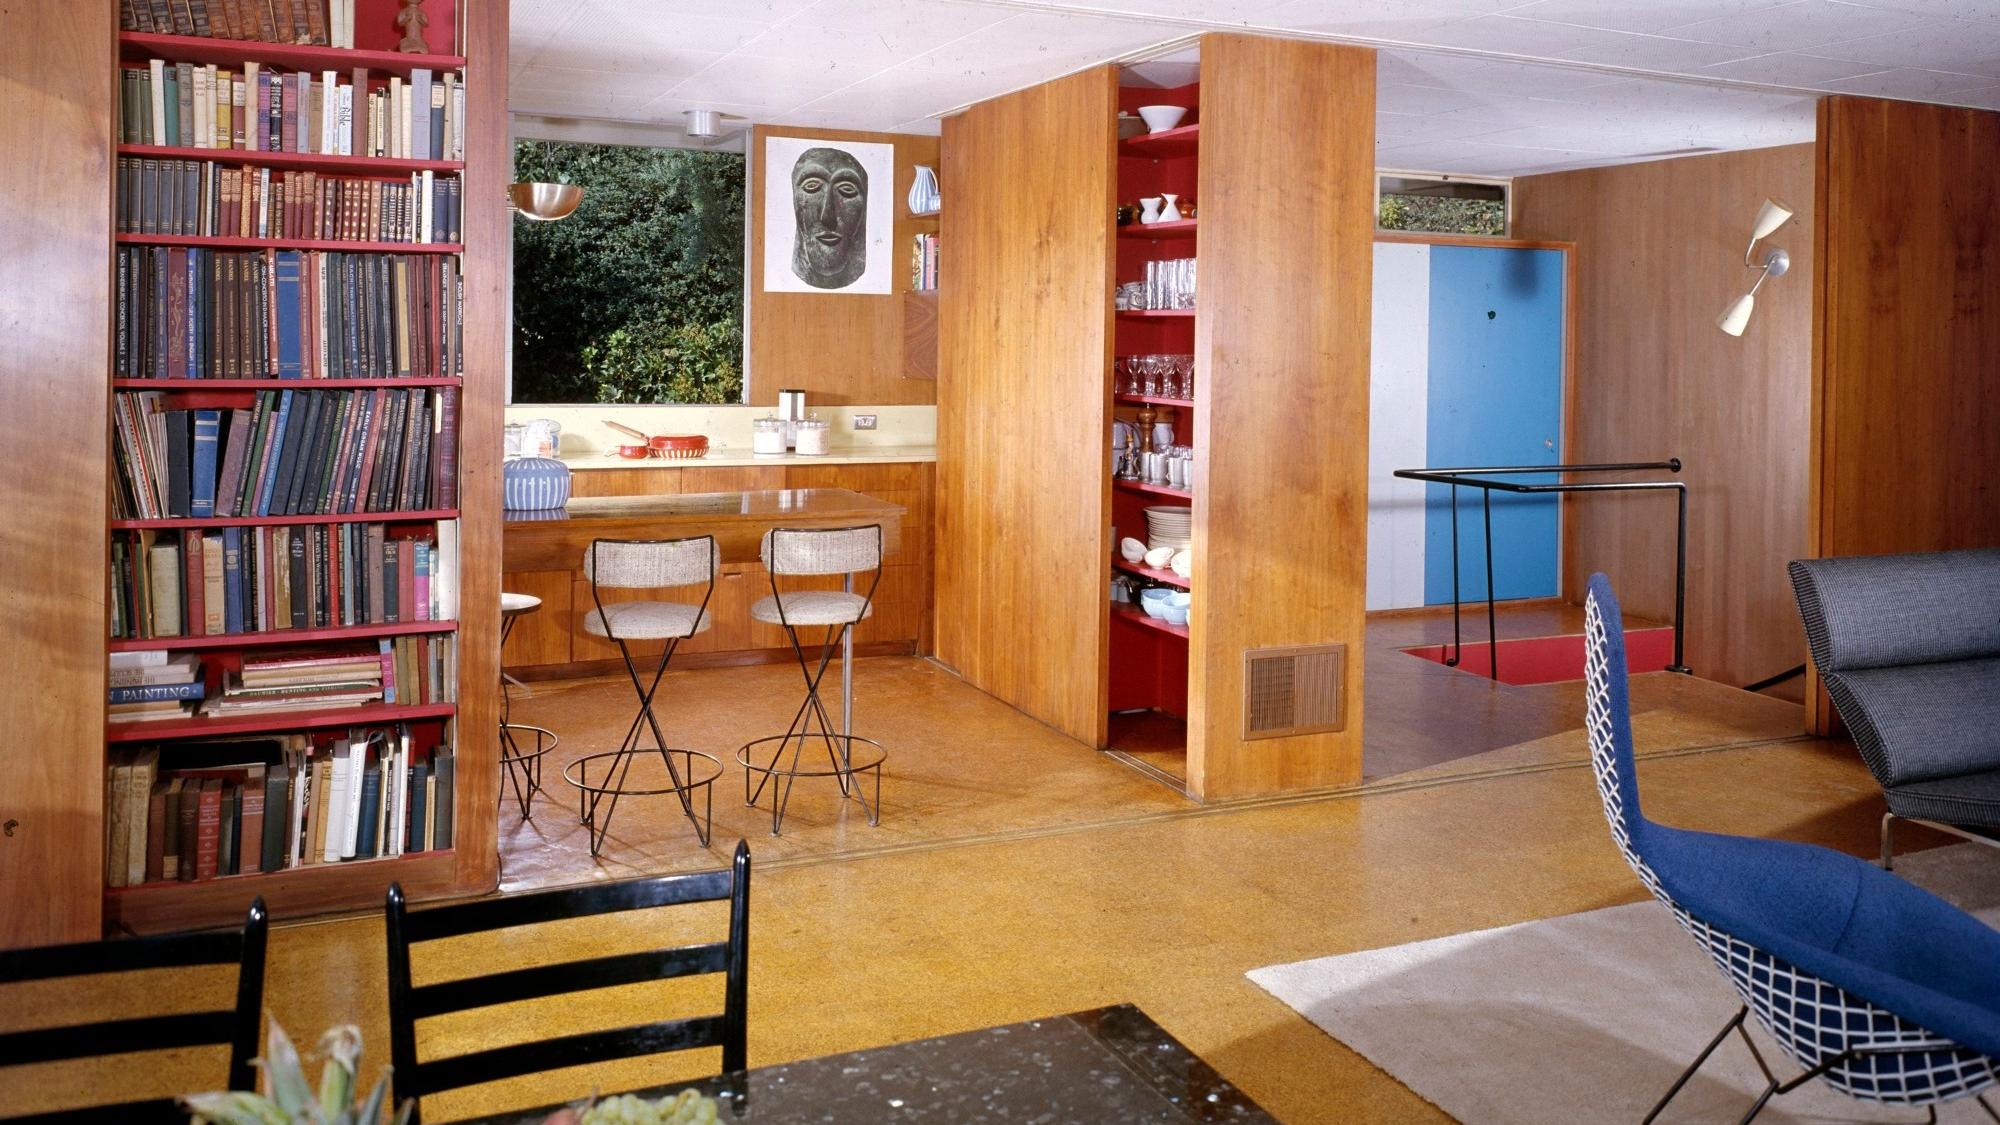 The Wohlstetters' main residence included a bookcase that slid into the wall, revealing the kitchen, photo by Julius Shulman/J. Paul Getty Trust